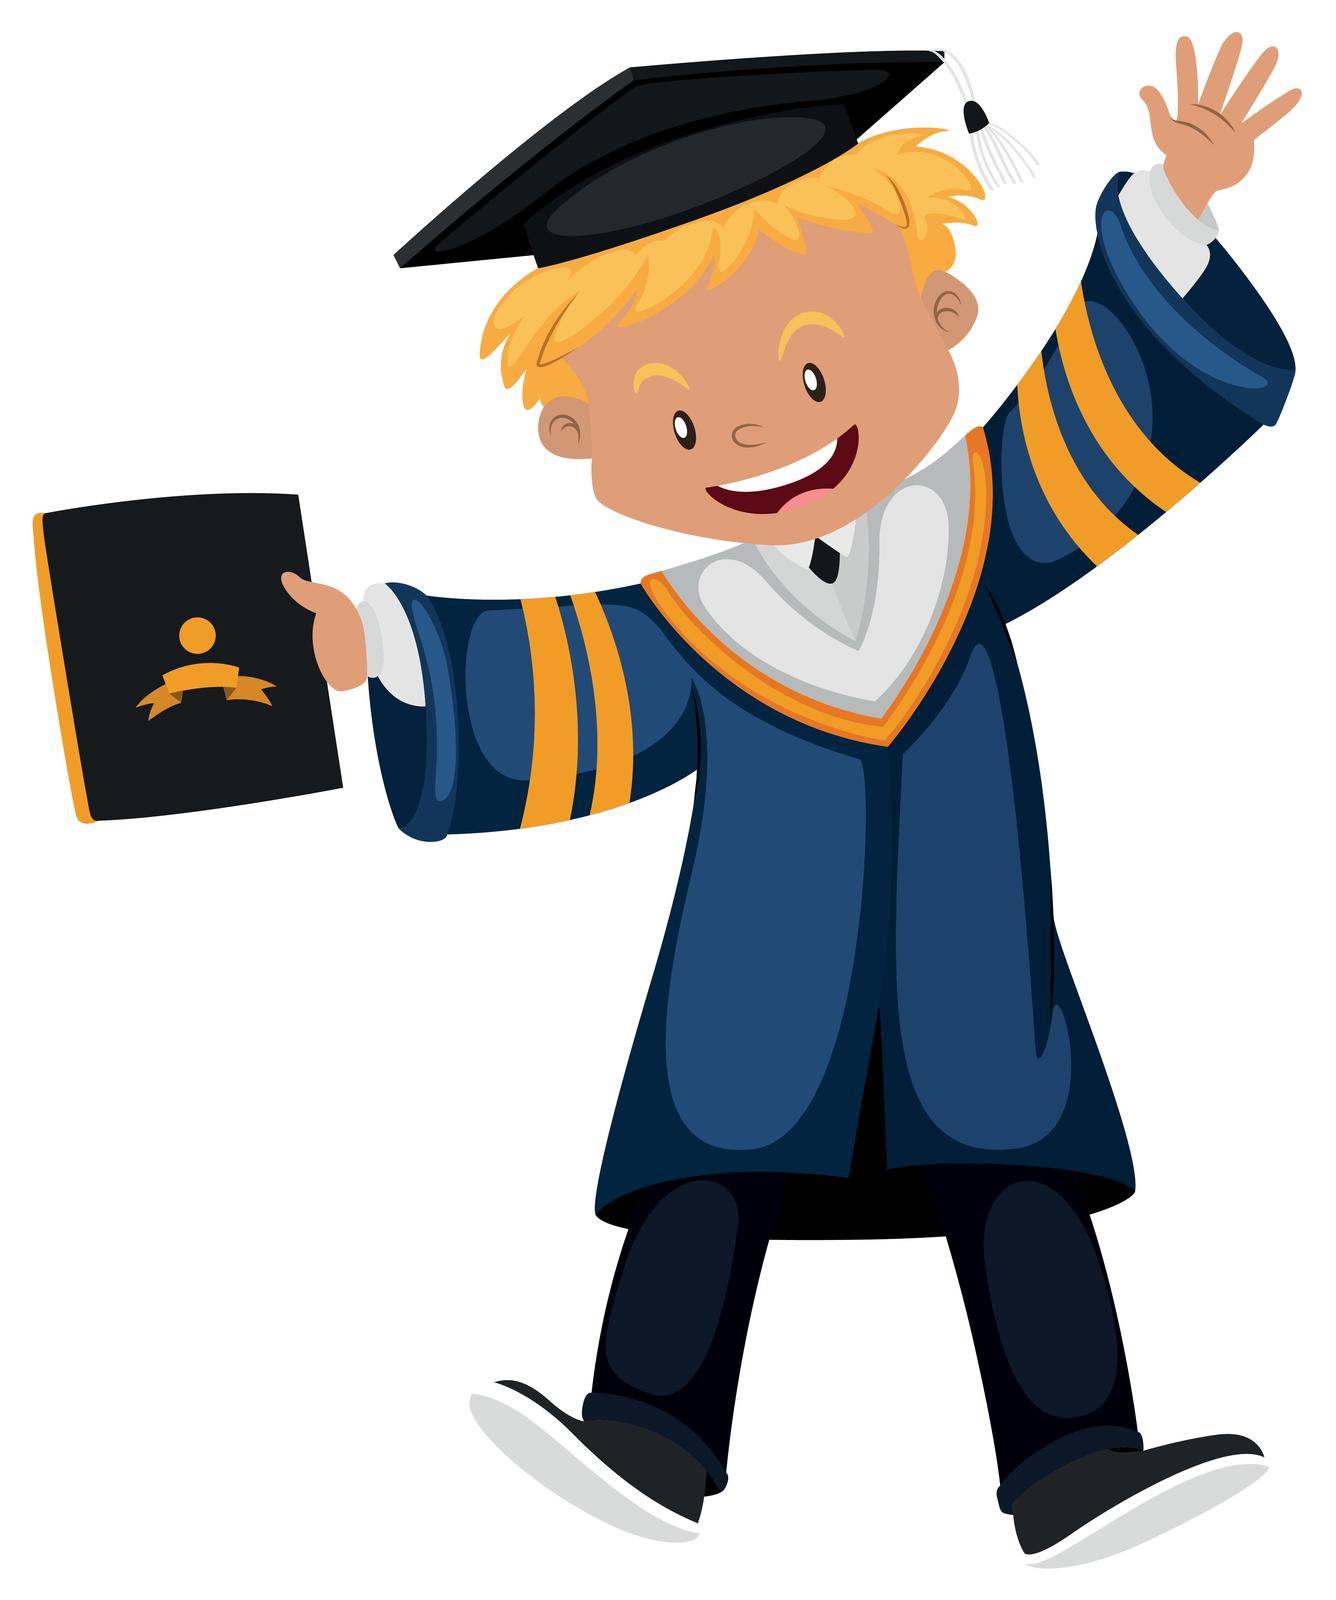 Man in graduation gown holding diploma illustration